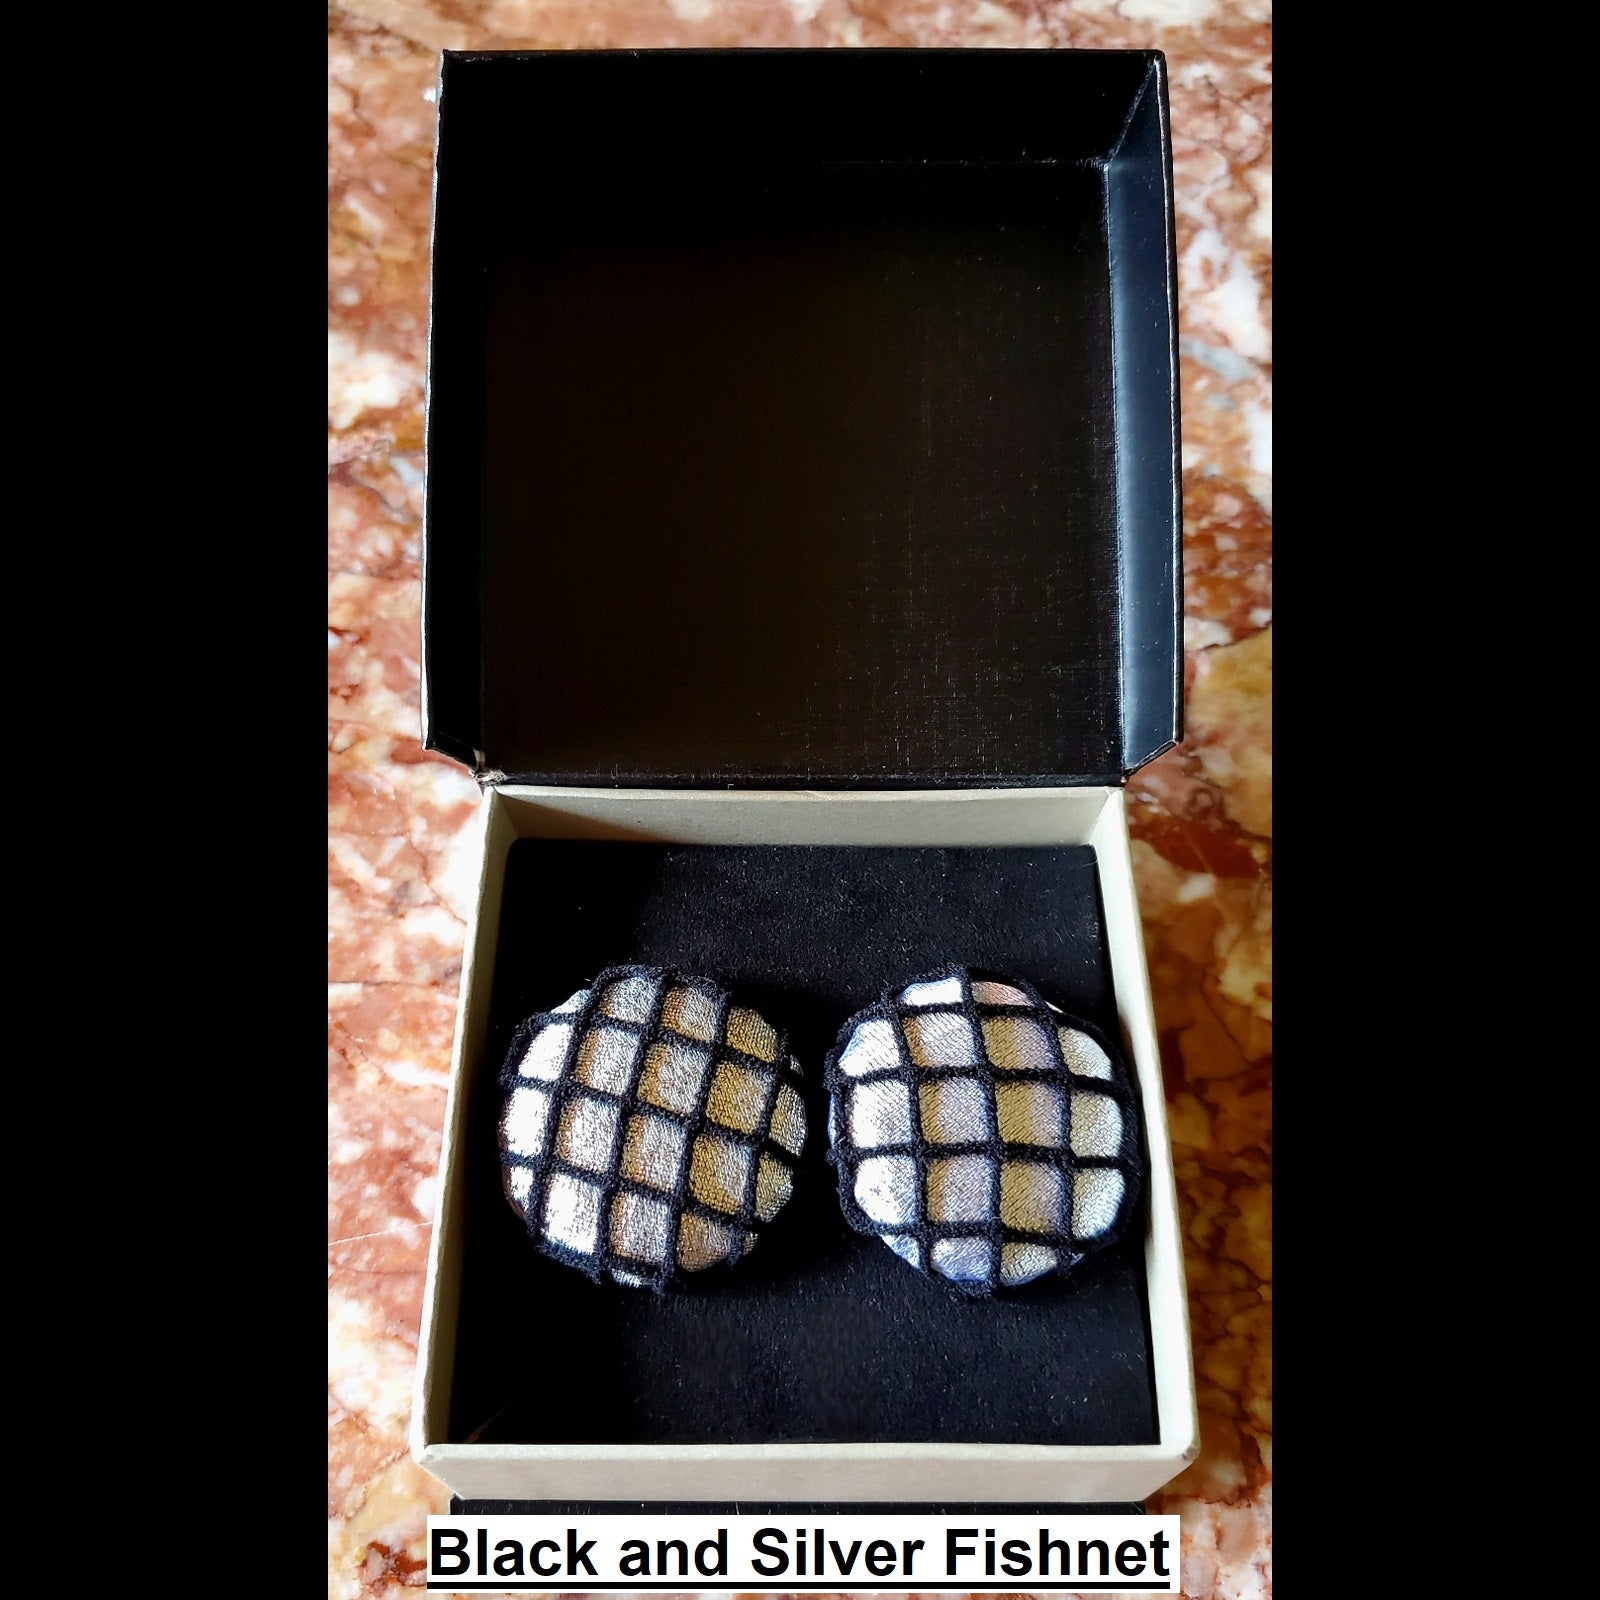 Black and silver fishnet print button earrings in jewelry box